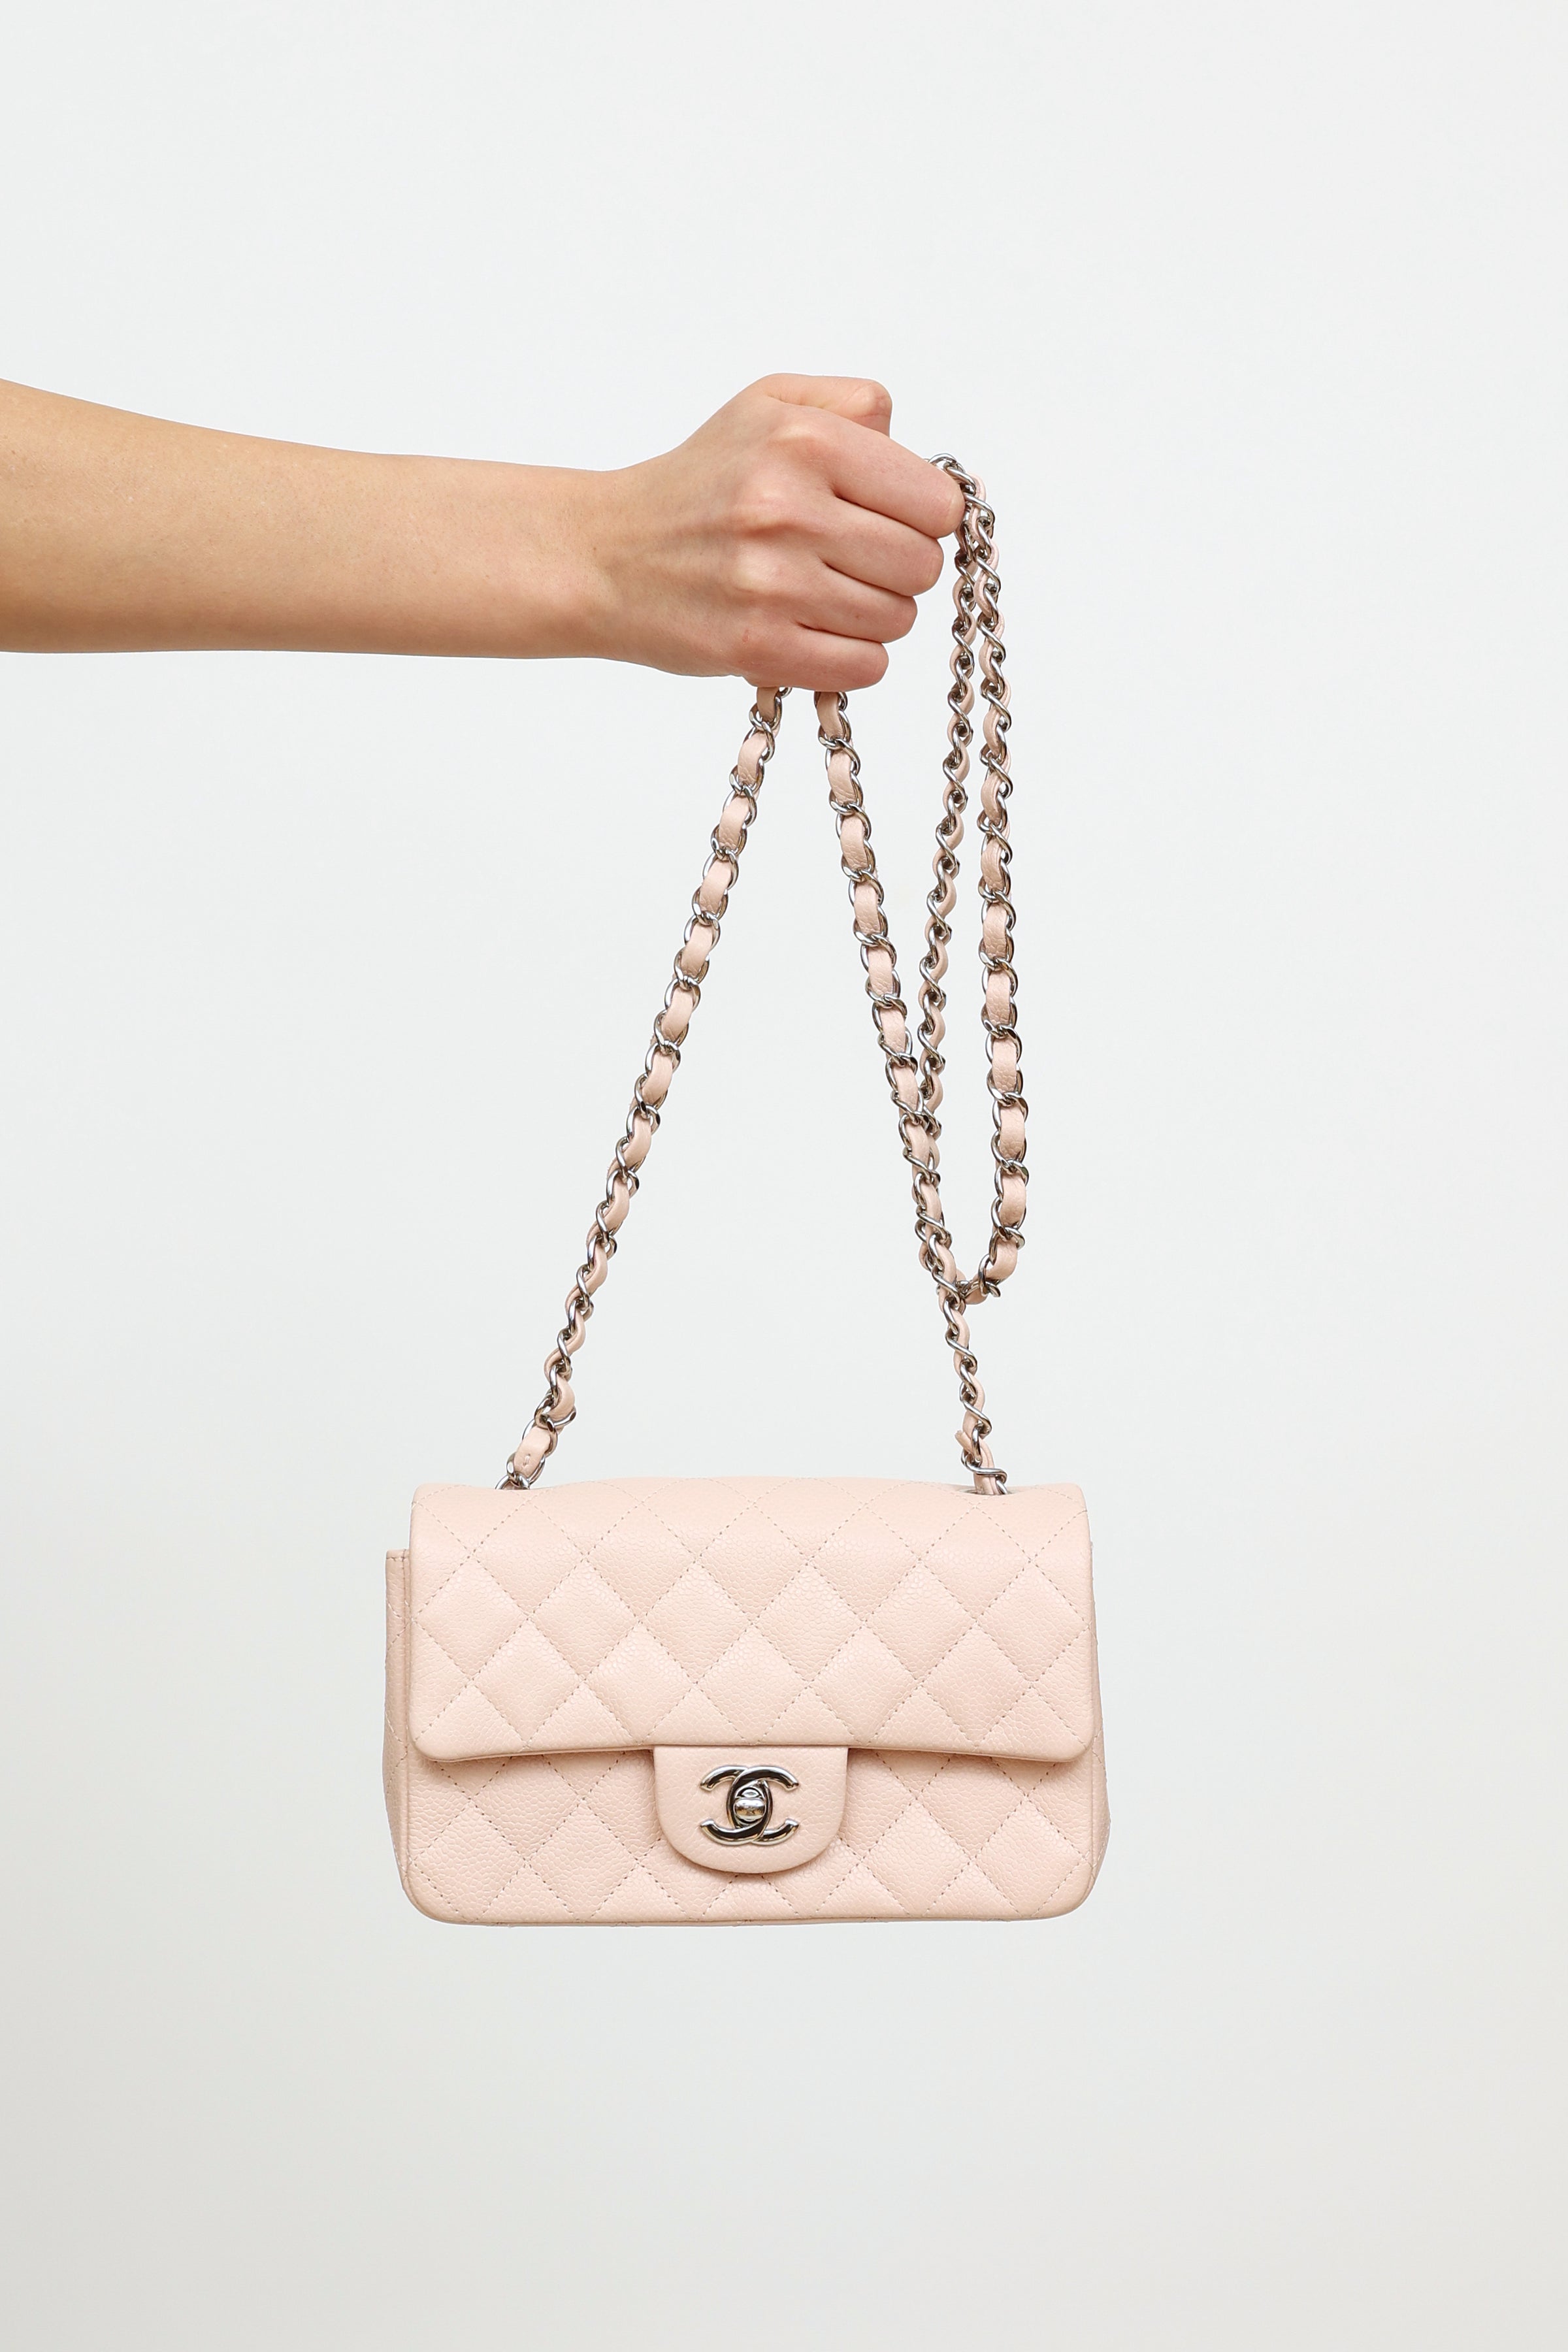 CHANEL CLASSIC FLAP DUSTY PINK BAG